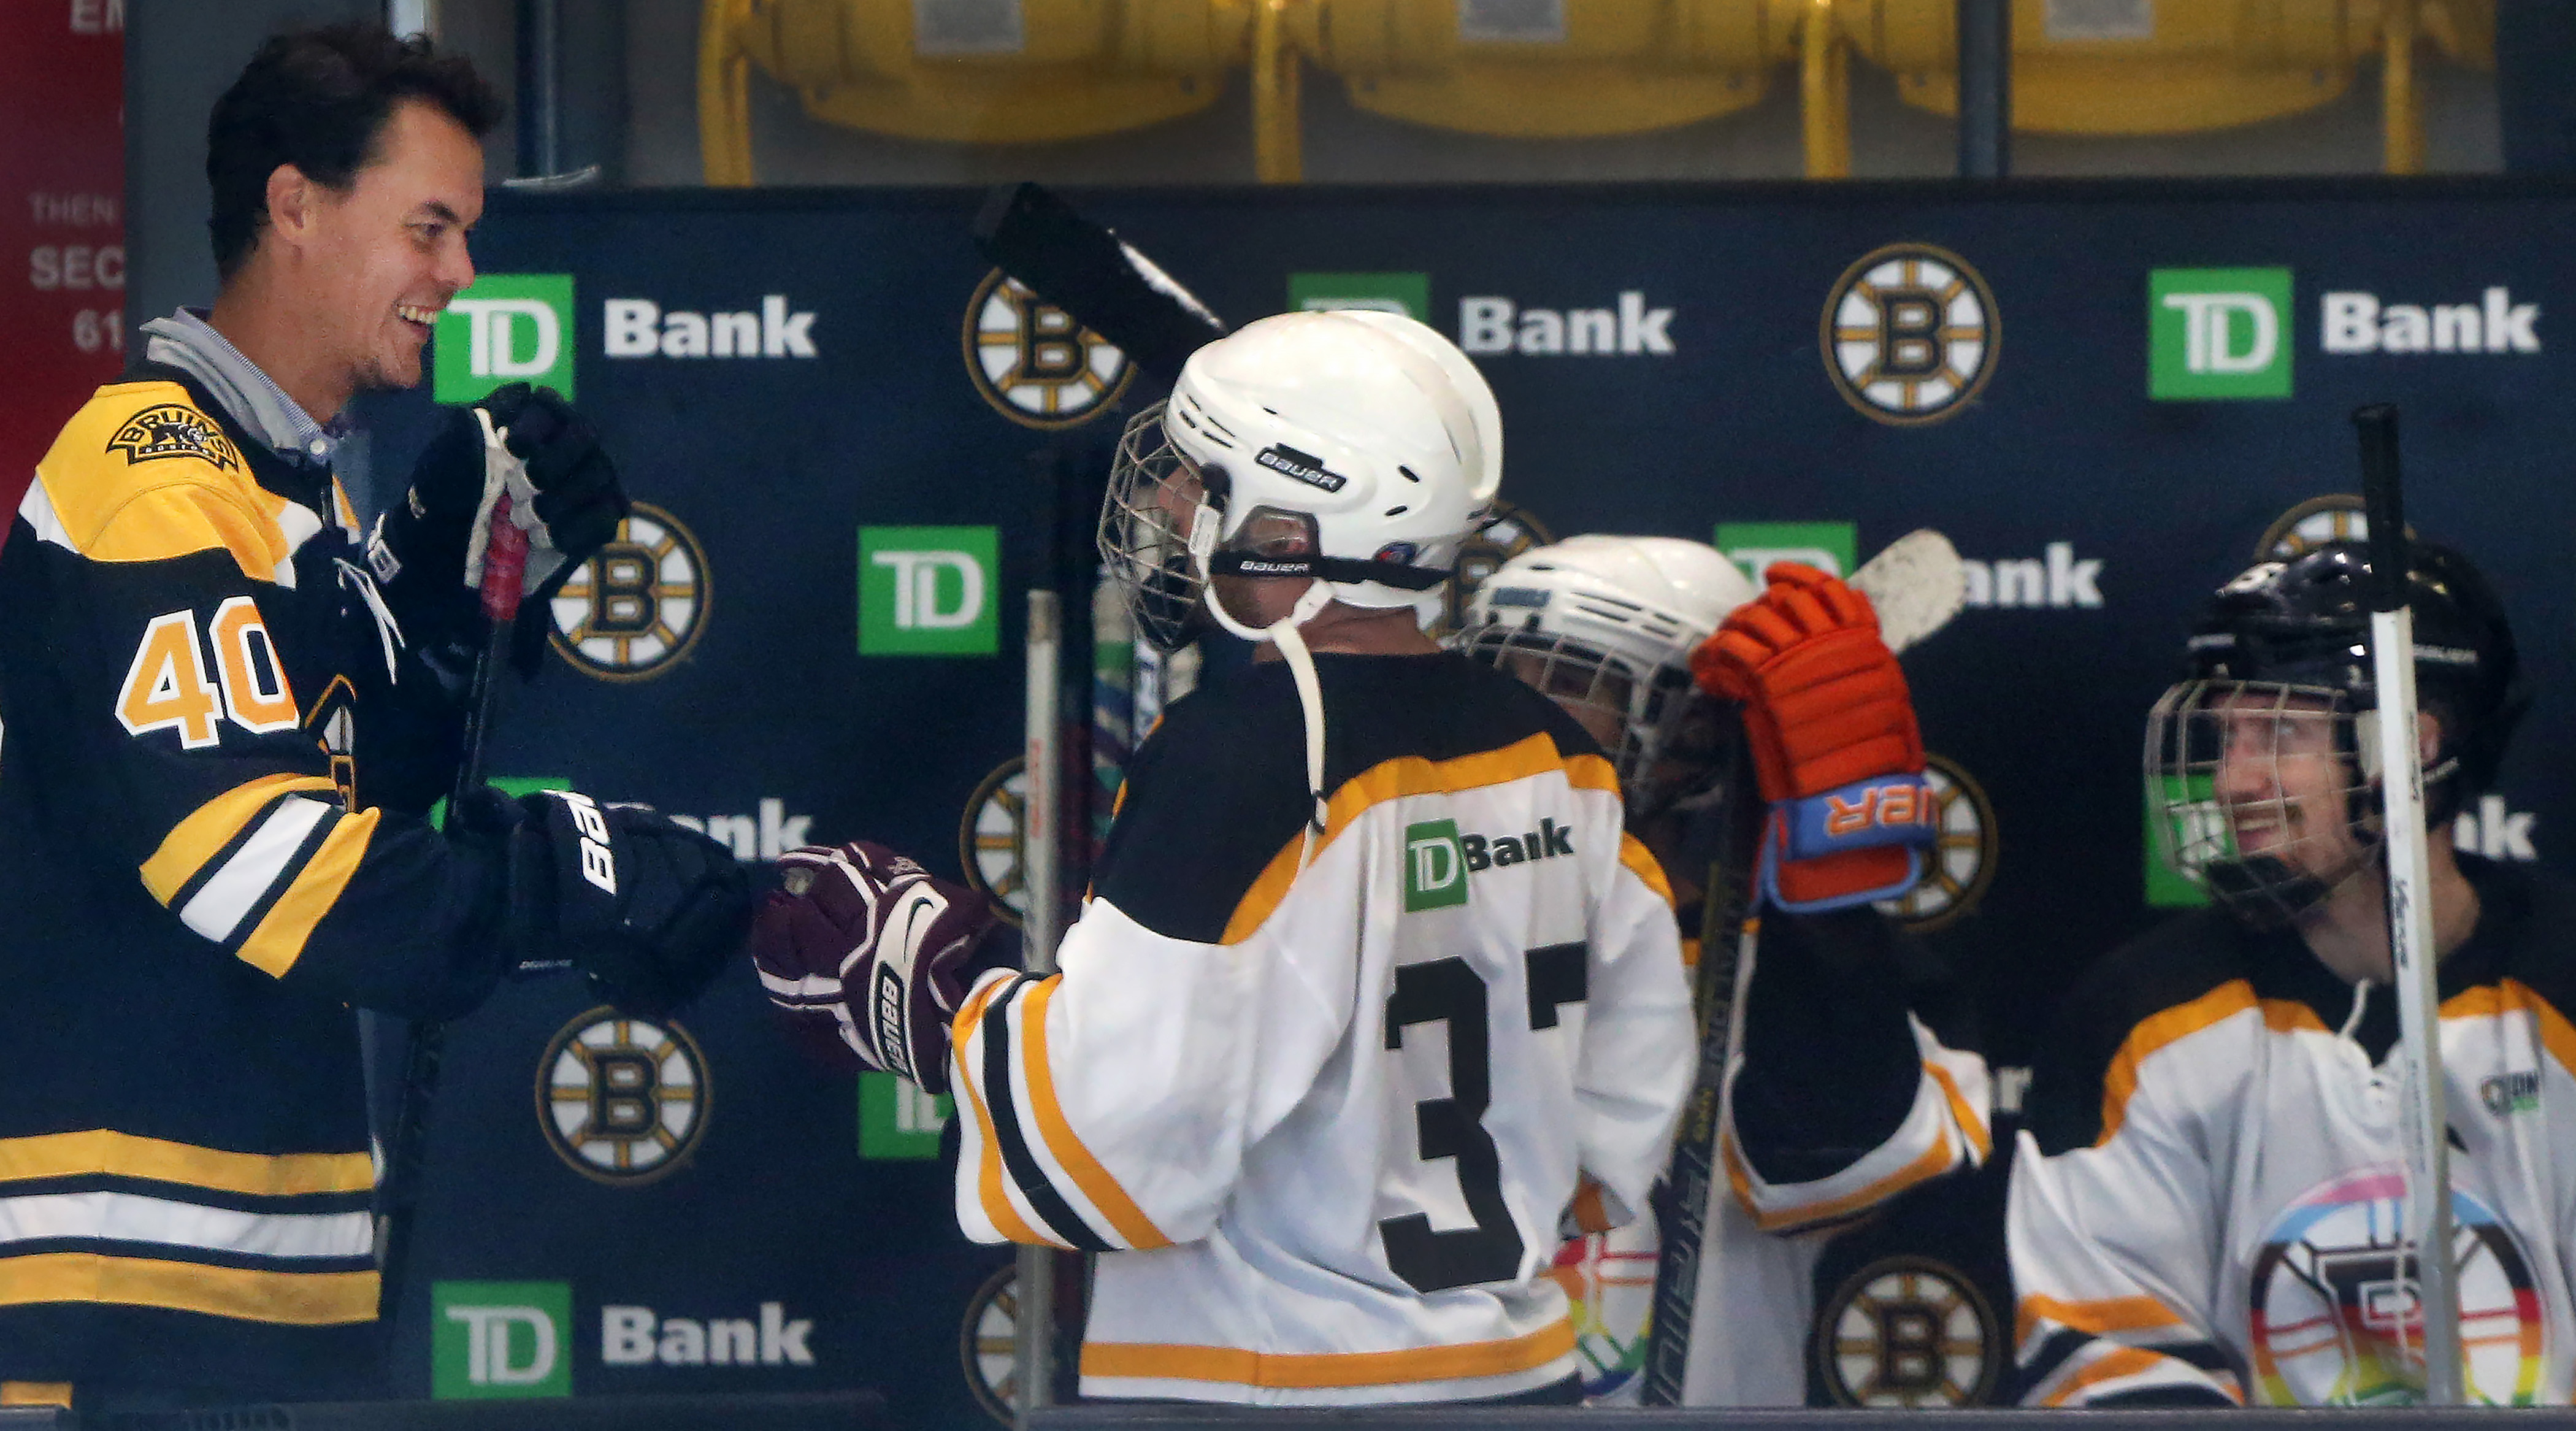 Boston Bruins: Top 5 Players Most Likely To Have Their Number Retired